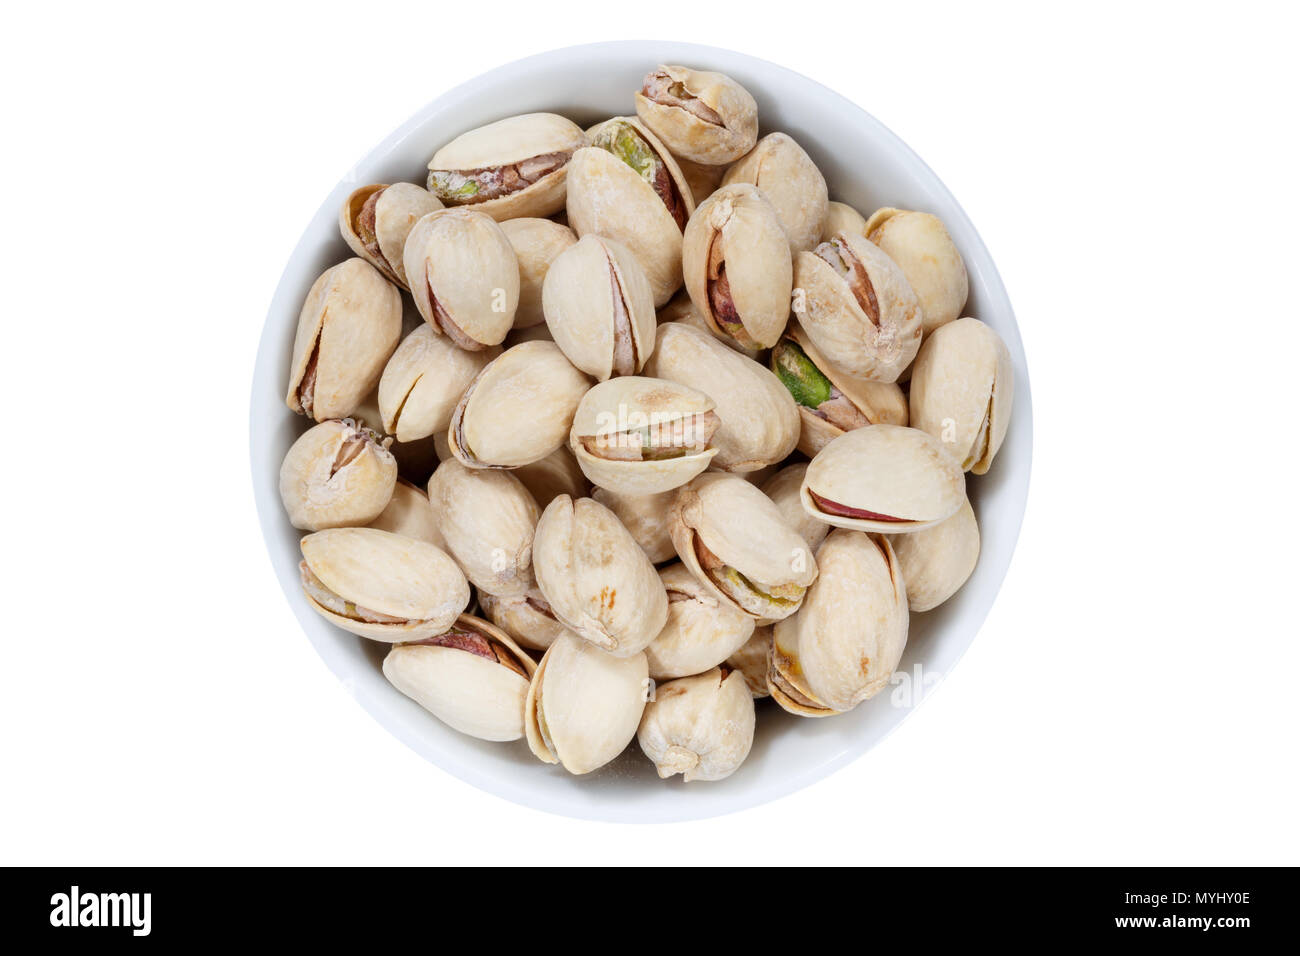 Pistachios pistachio nuts from above bowl isolated on a white background Stock Photo